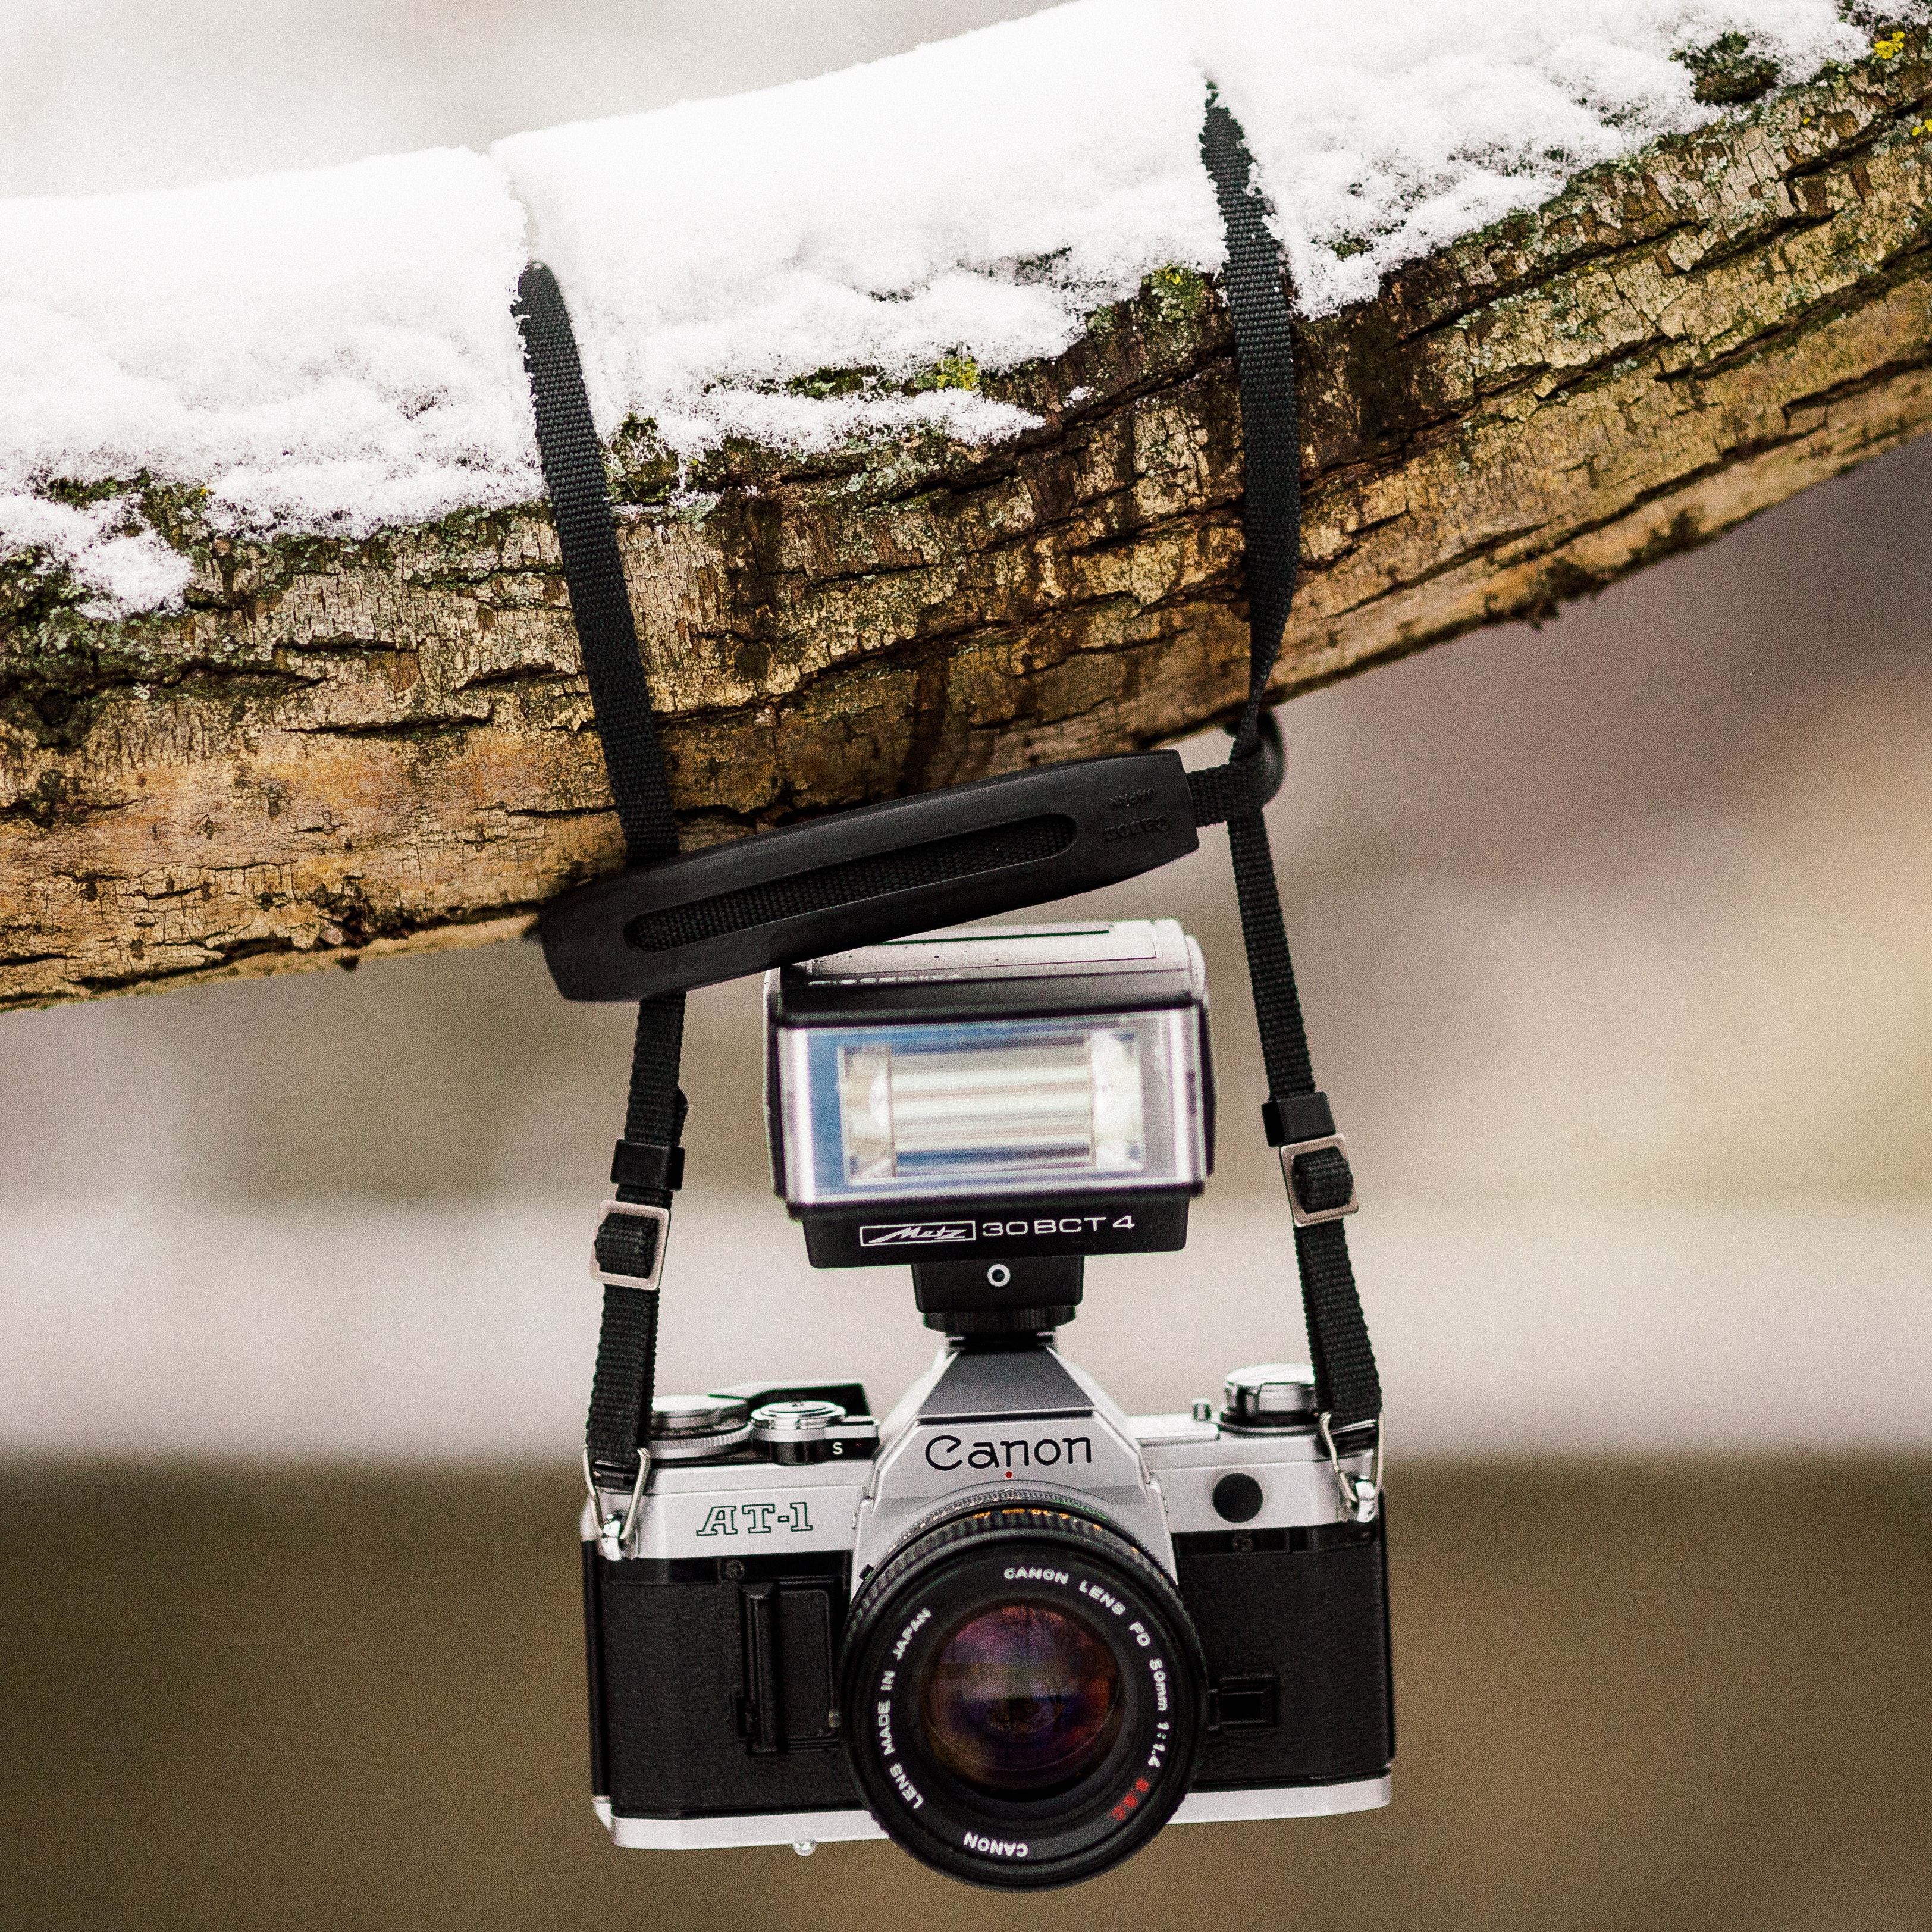 Black and Gray Canon Dslr Camera Hanging on Brown Tree Trunk With Snow, Retro, Old-fashioned, Optical, Outdoors, HQ Photo